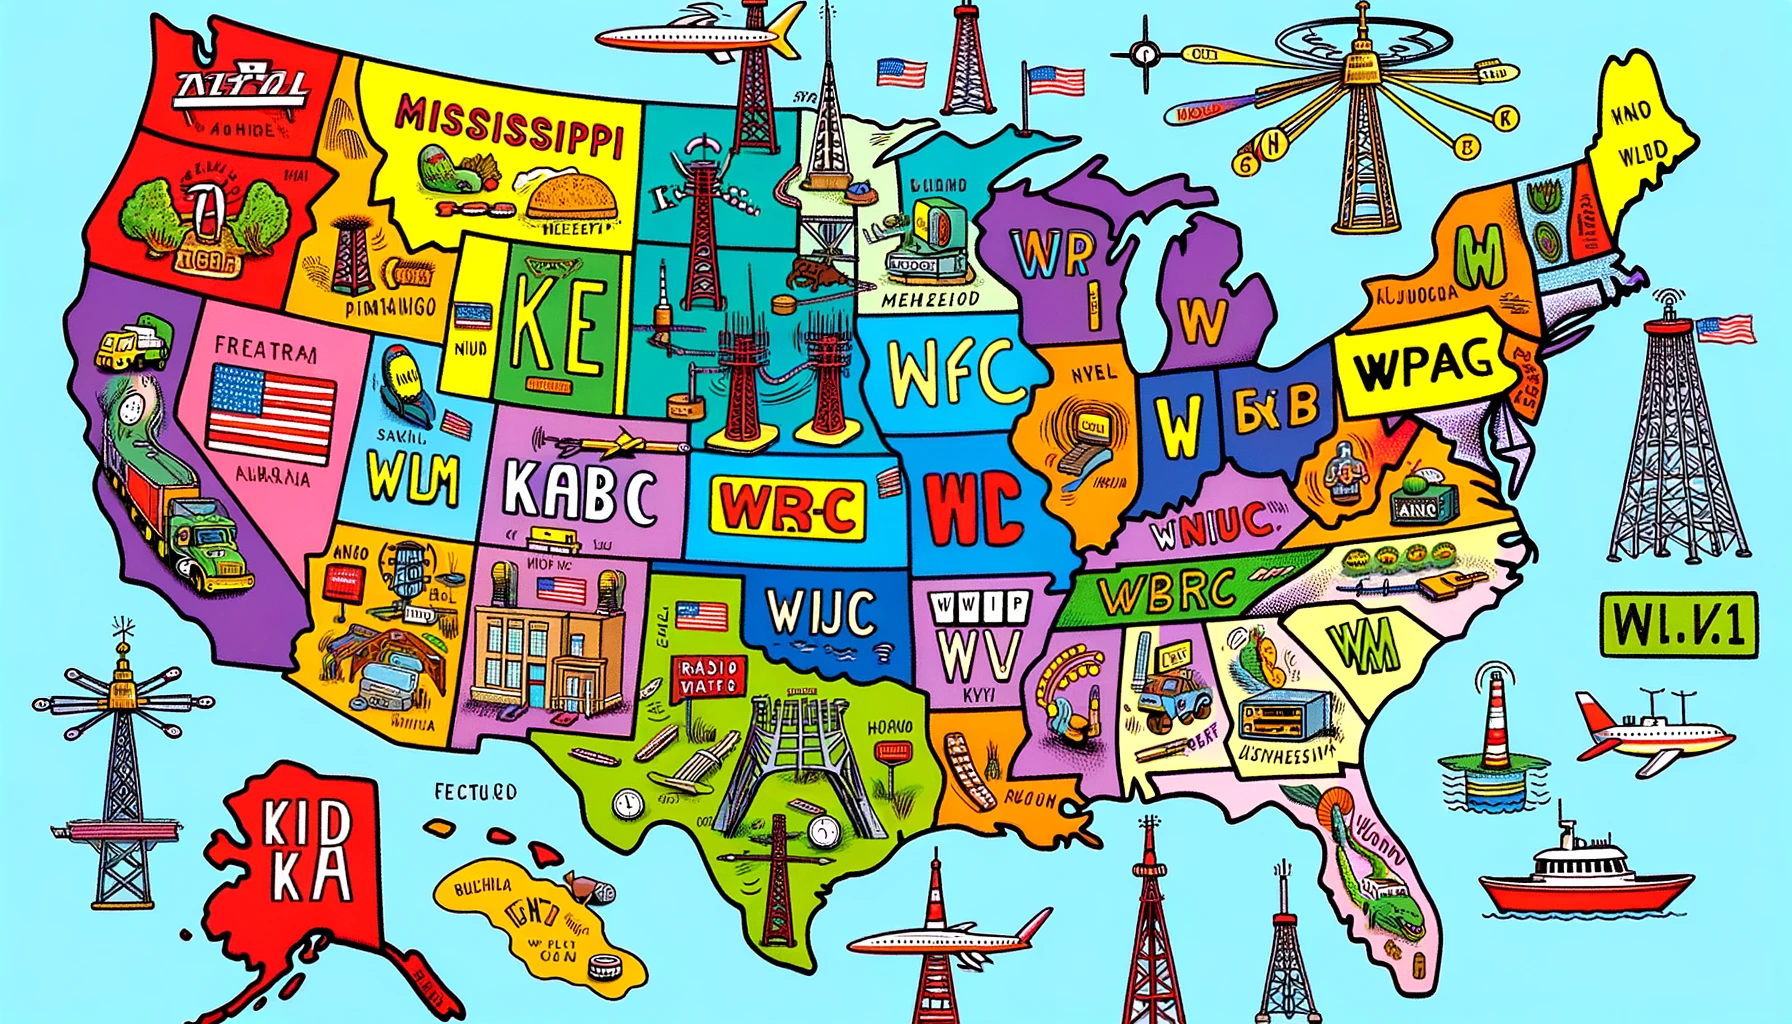 A colorful and humorous illustration of a map of the United States, with the Mississippi River prominently dividing the map. On the left side of the map (west of the Mississippi), there are radio towers with call signs starting with 'K' like KABC, and on the right side (east of the Mississippi), there are radio towers with call signs starting with 'W' like WNBC. Include a few fun, fictional call signs like WKRP and WJM. The illustration should be lively and playful, with bright colors and a cartoonish style.